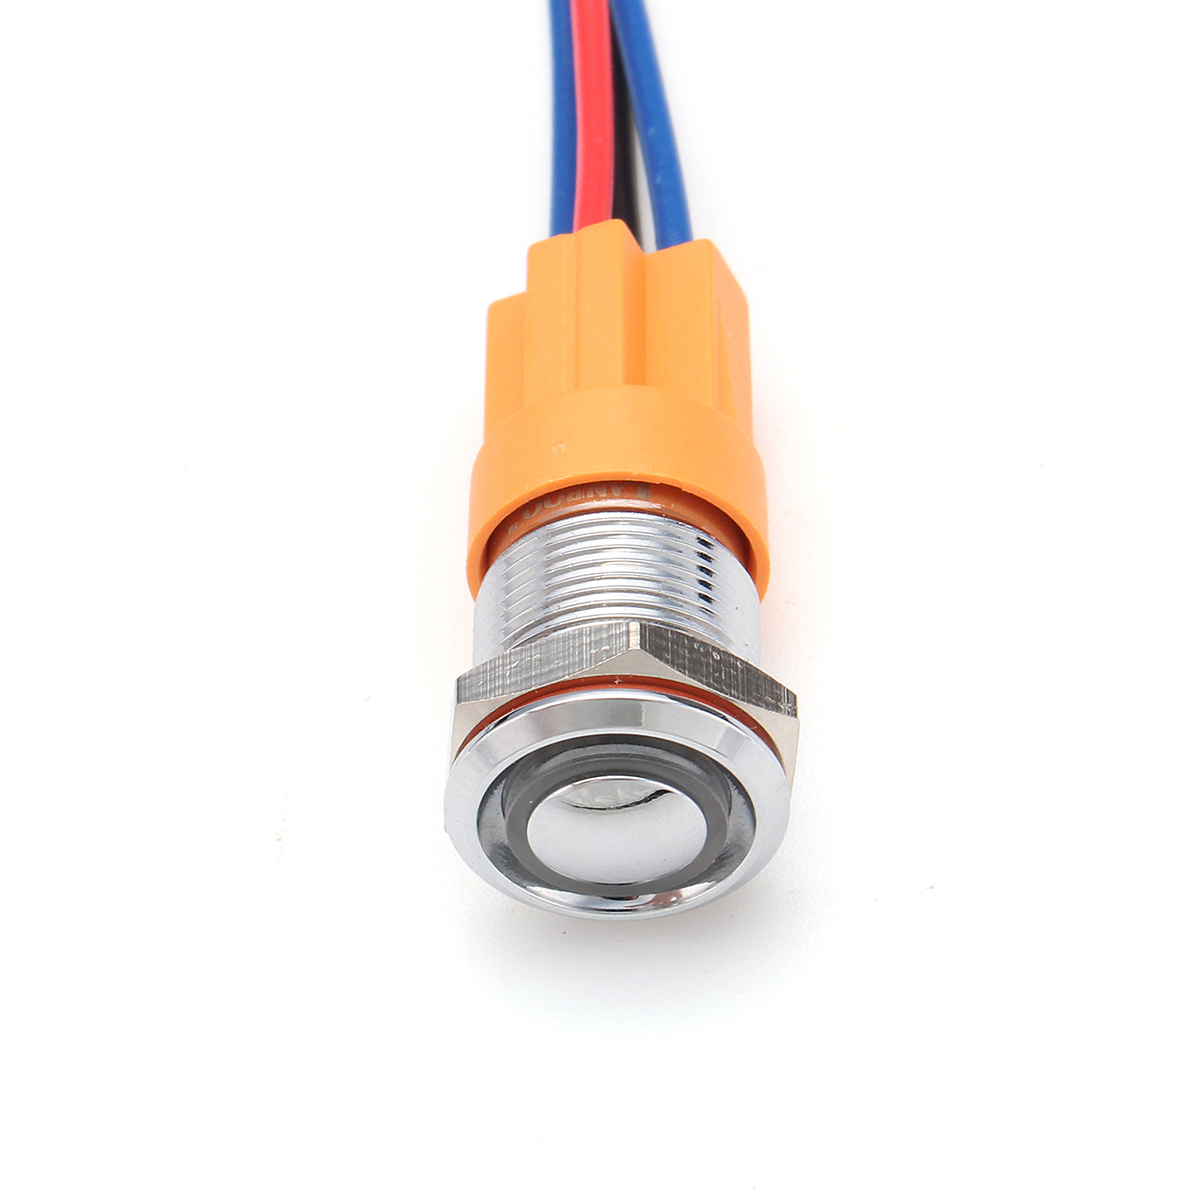 12V-24V-4Pin-12mm-Metal-ONOFF-LED-Push-Button-Switch-Wiring-Harness-Switch-Self-Locking-Waterproof-1225089-3